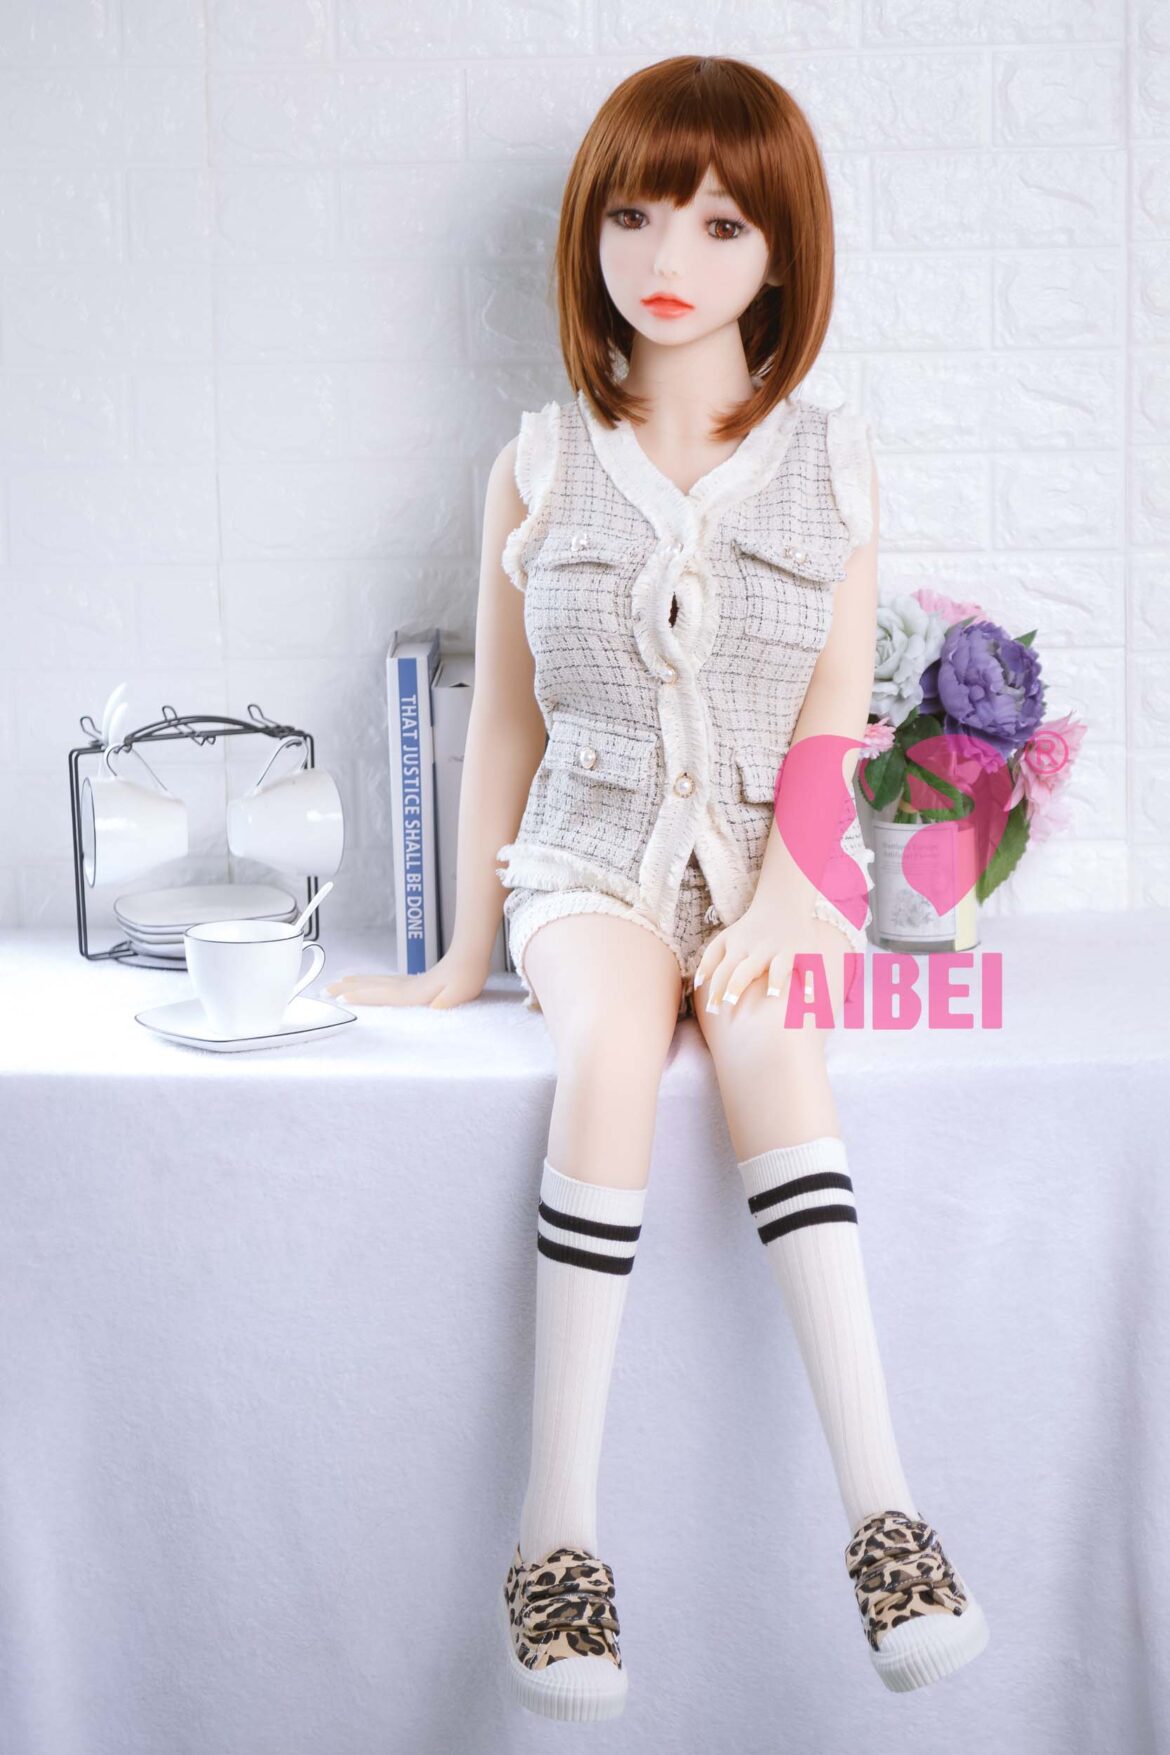 Buy Authentic Aibei Sex Dolls At Wholesale Price And Free Shipping